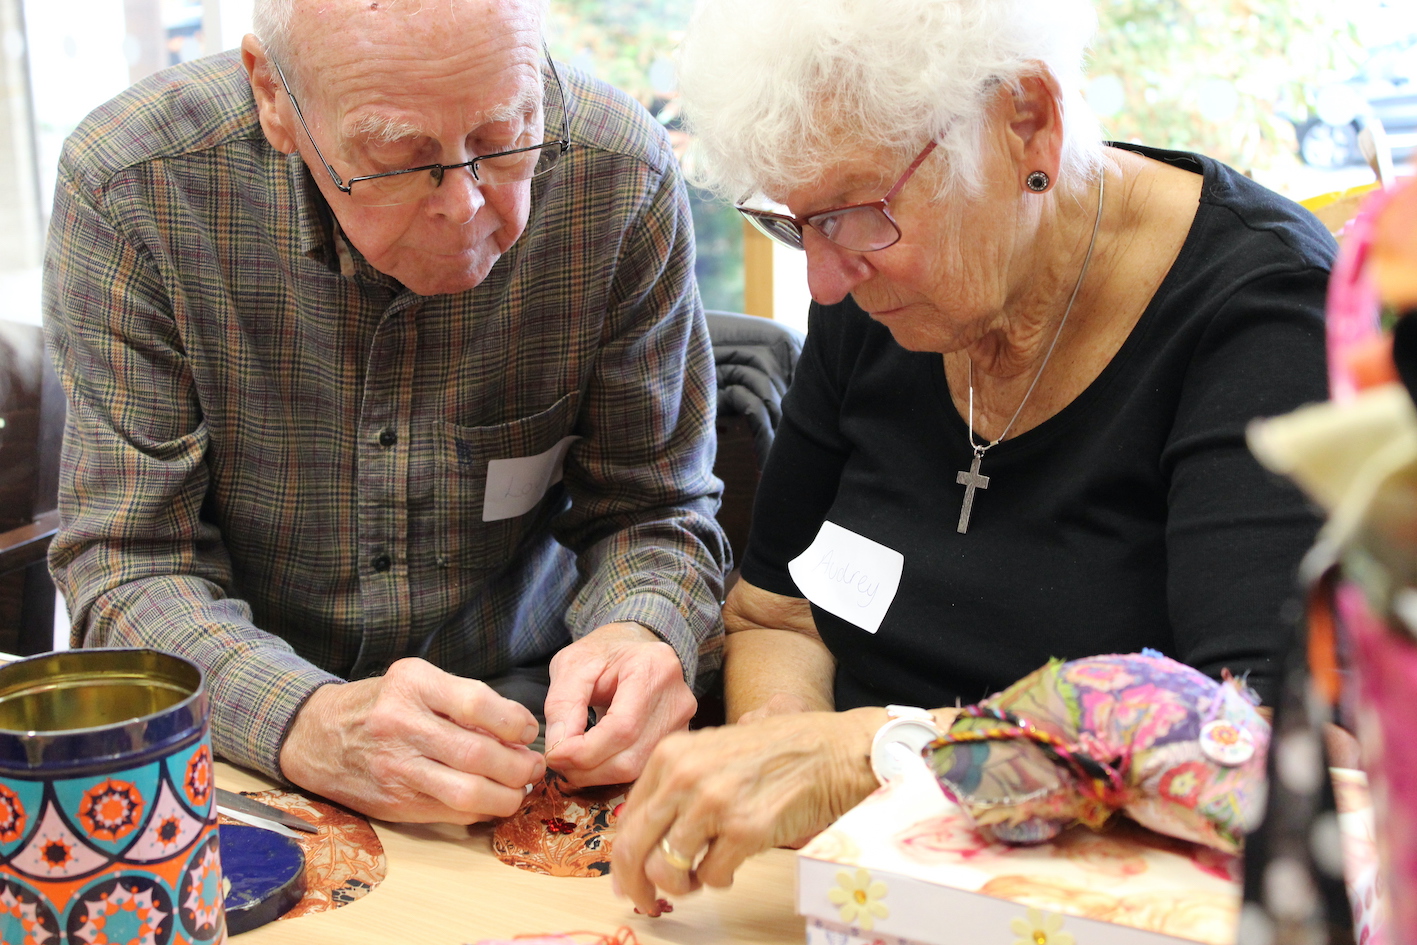 Two old people sitting at table sewing fabric in a room